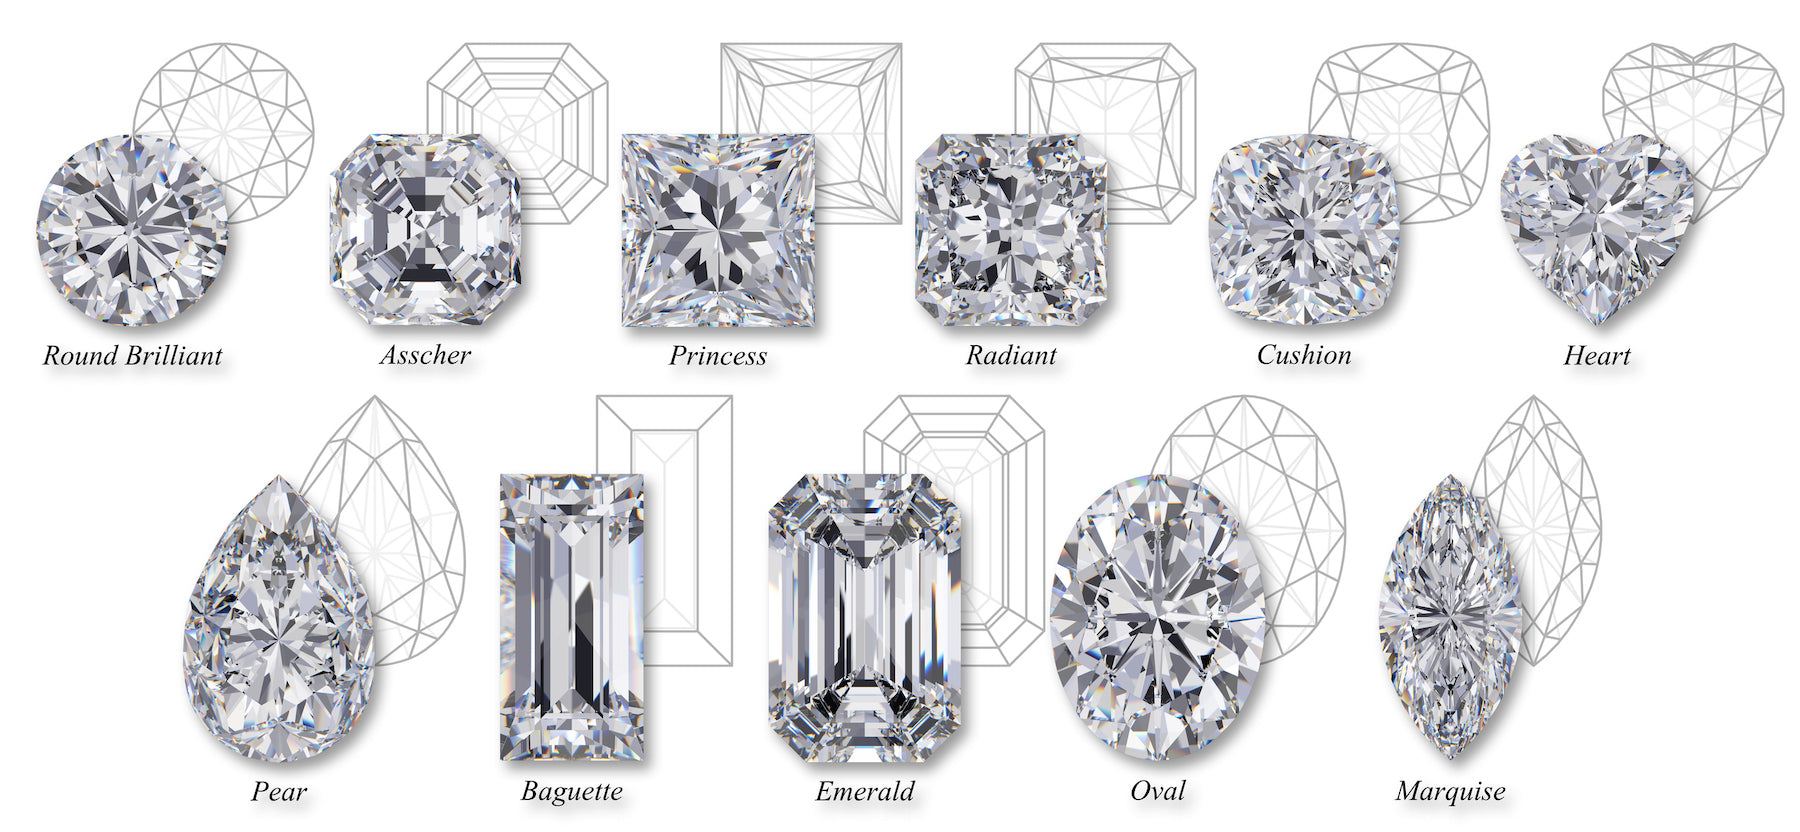 Diamond Shapes And Diamond Cuts The Ultimate Guide The London